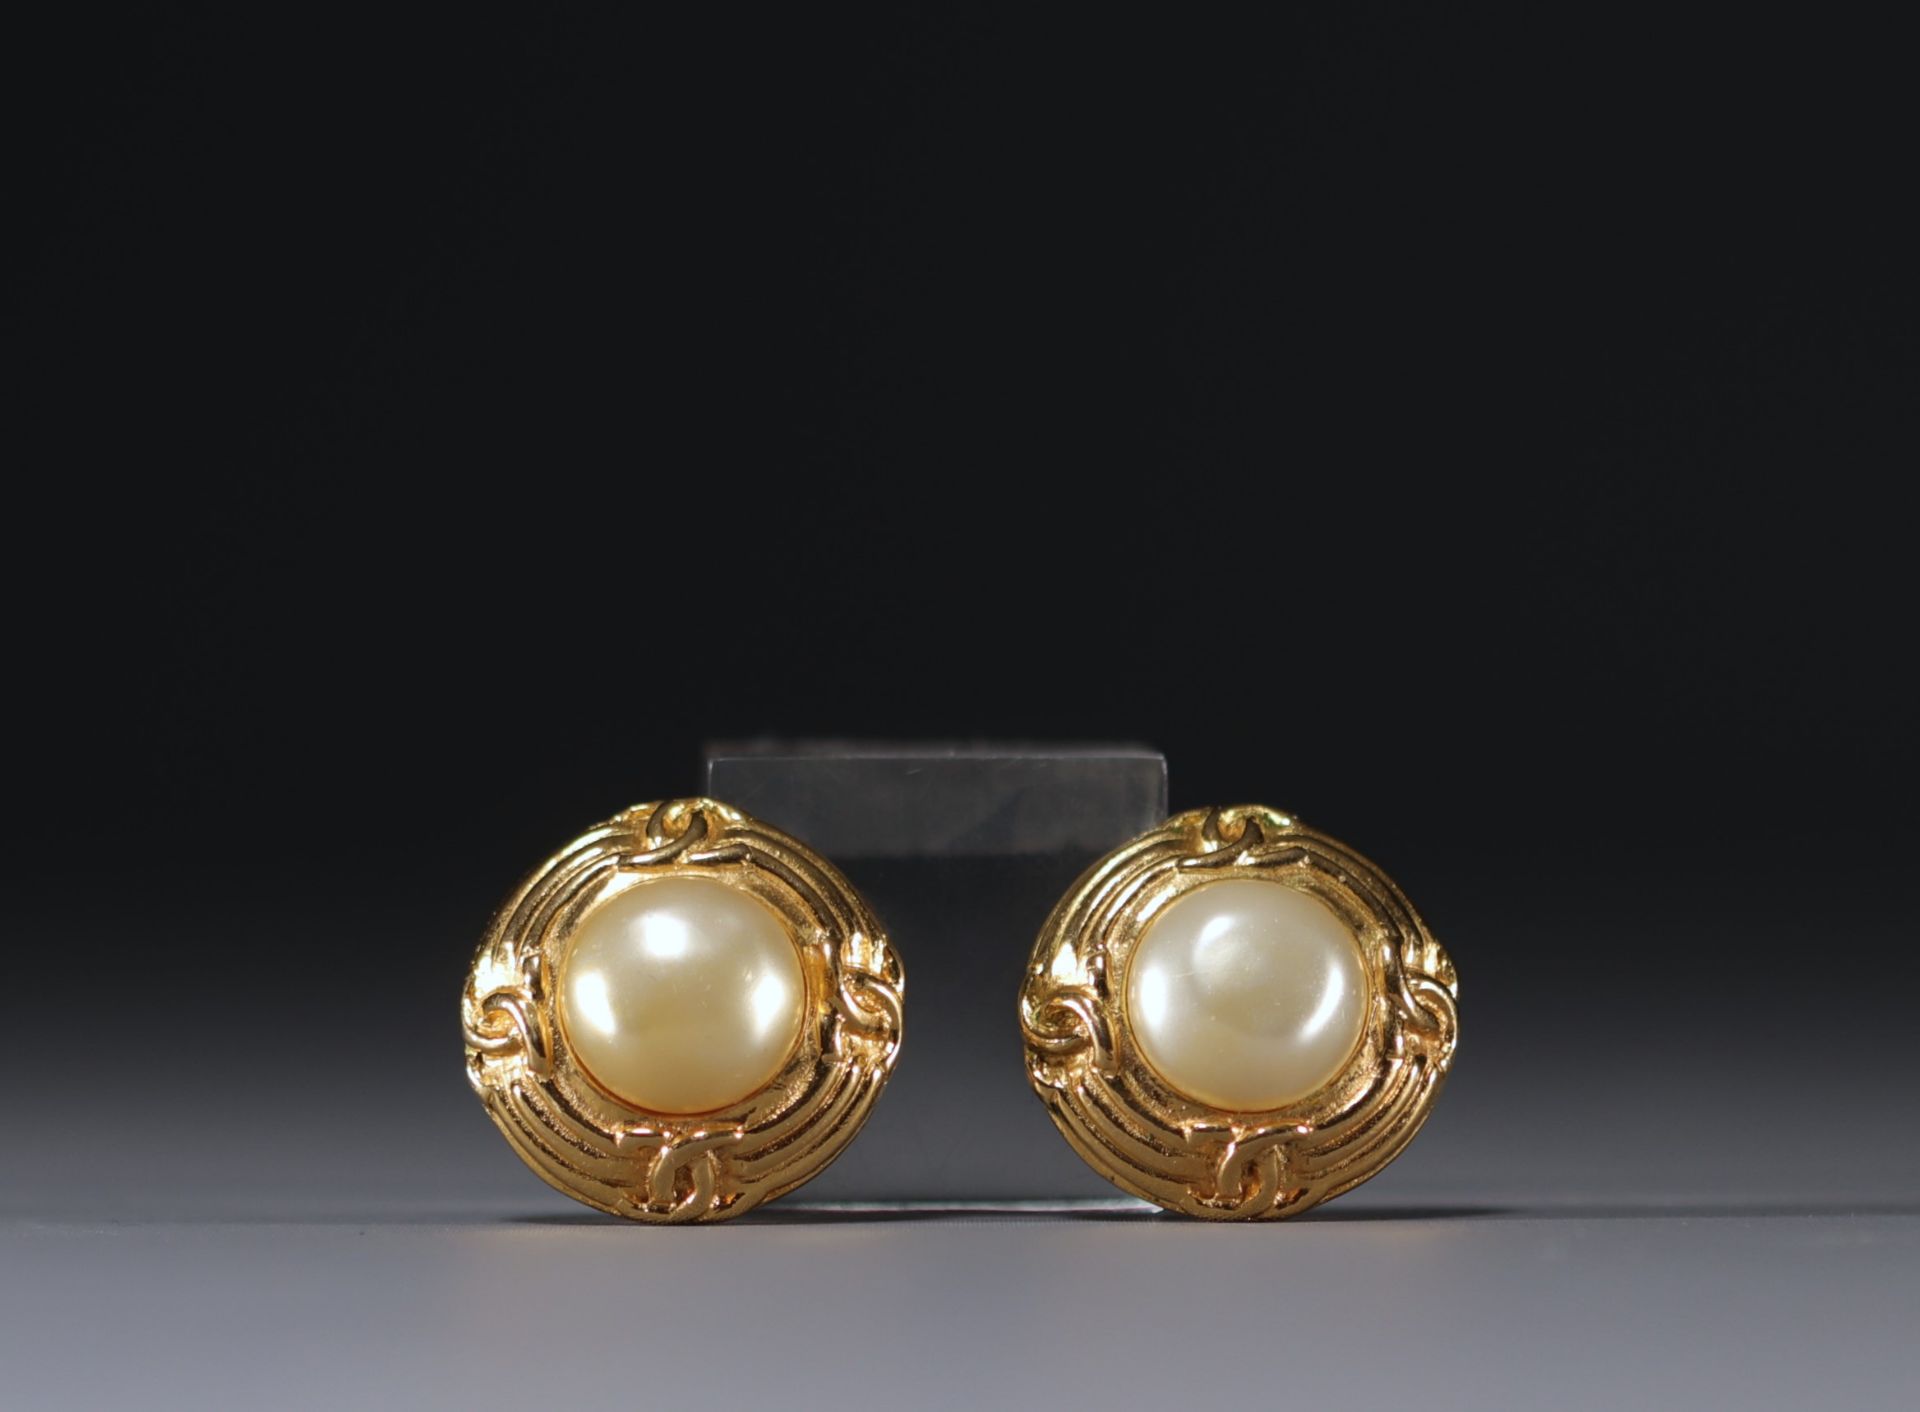 CHANEL - Pair of gold-coloured earrings, mother-of-pearl cabochon. - Bild 2 aus 3